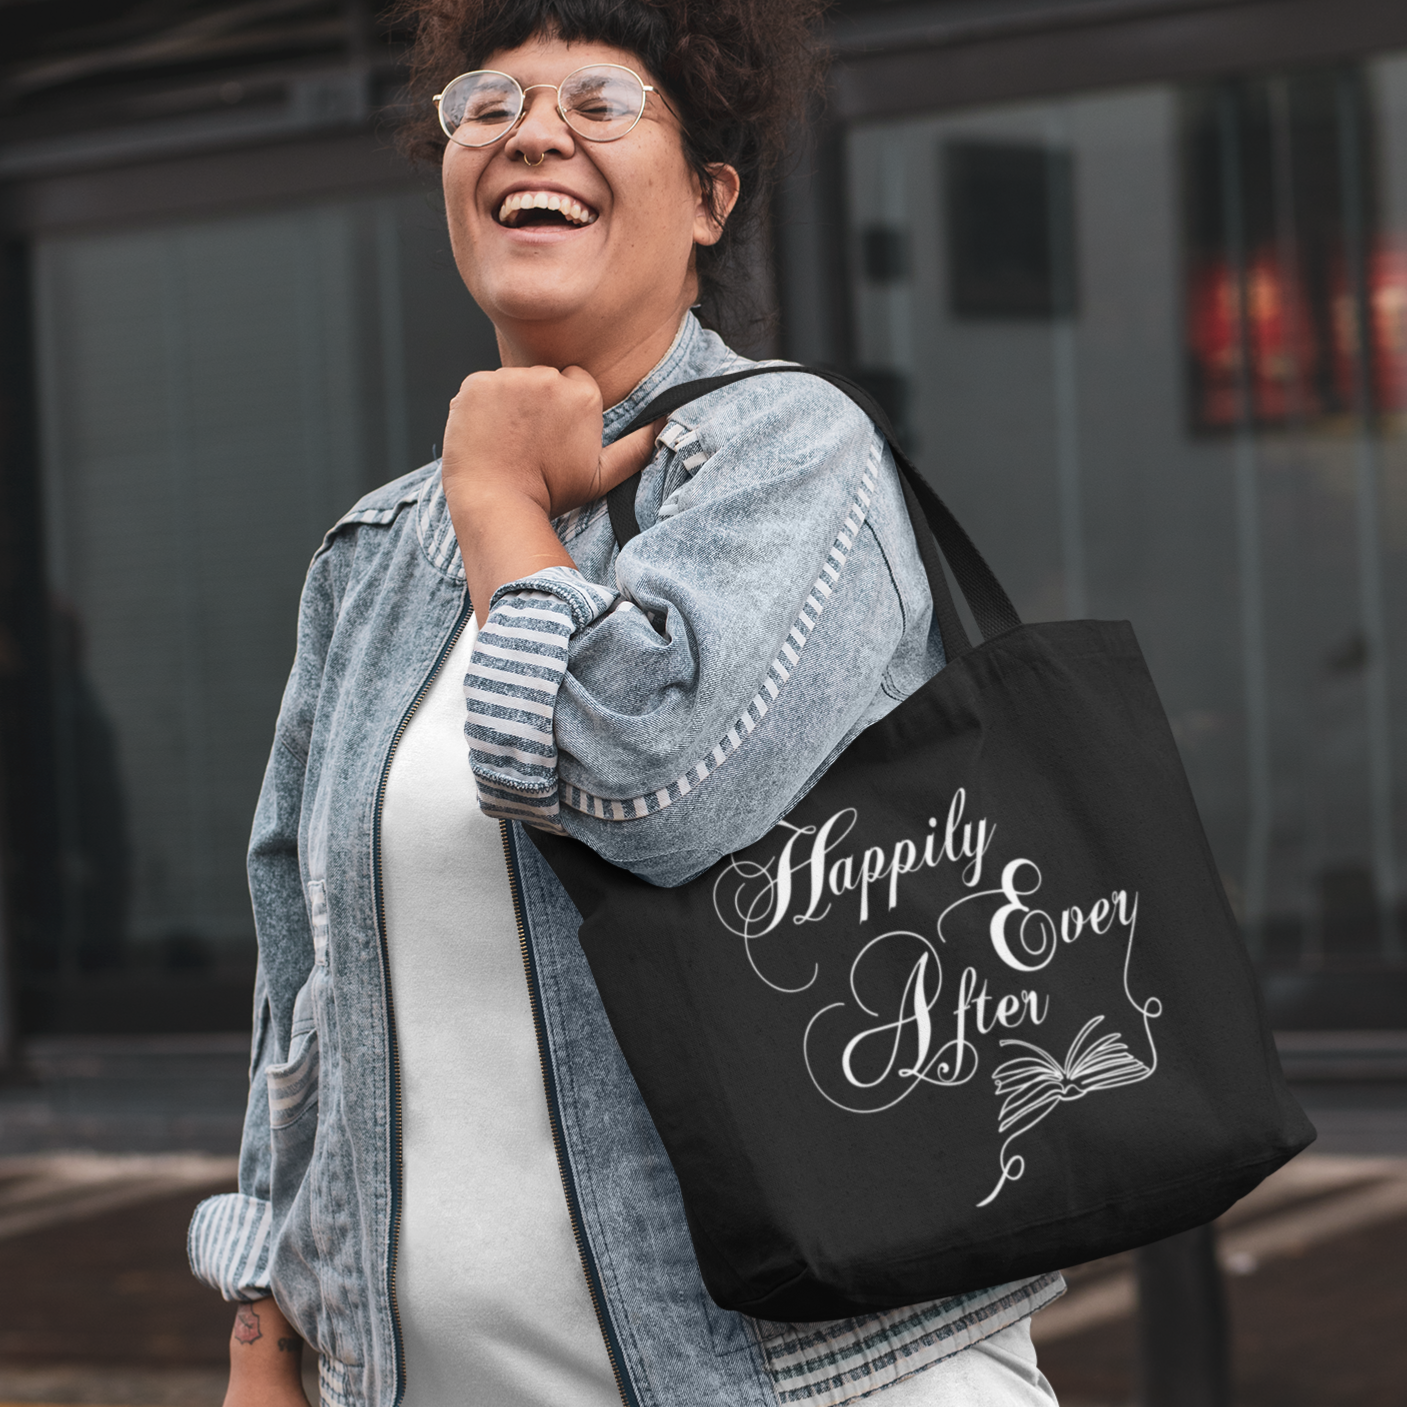 Happily Ever After HEA romance book trope tote bag